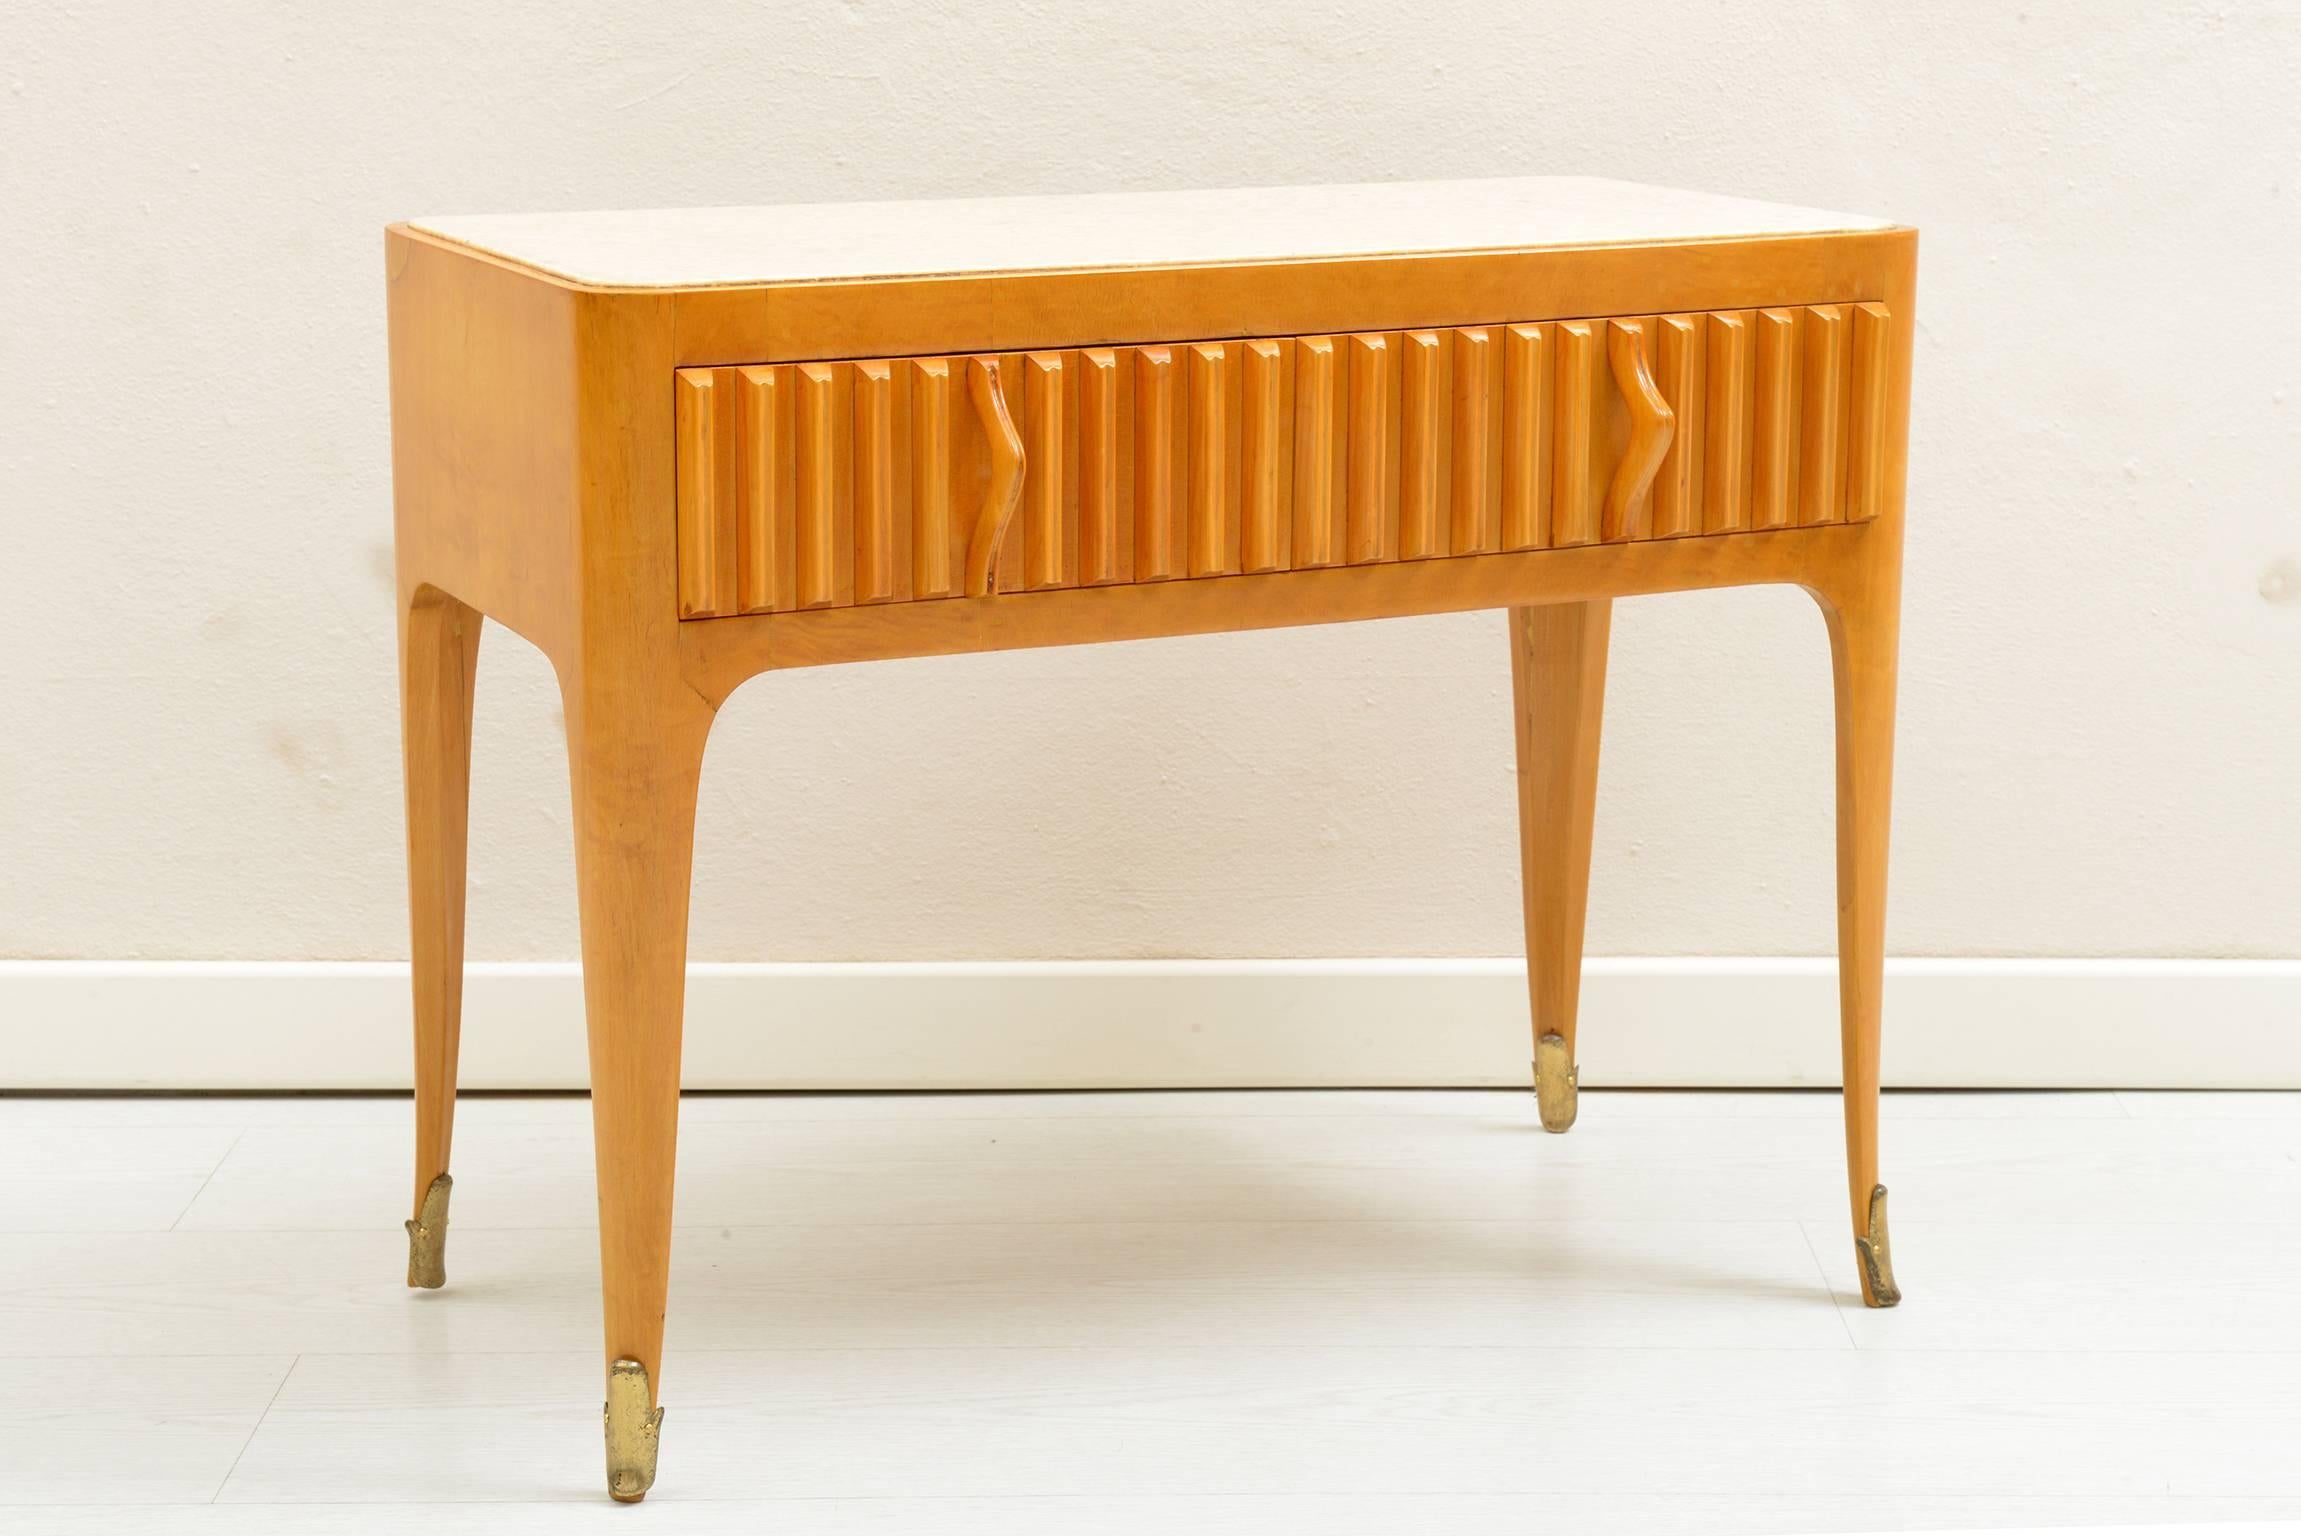 Solid maples structure with slender elegant legs, two fluted drawers in the front with beautiful sculptured and curved solid maples handles.
Brass details in the feet.
Top encased marble.